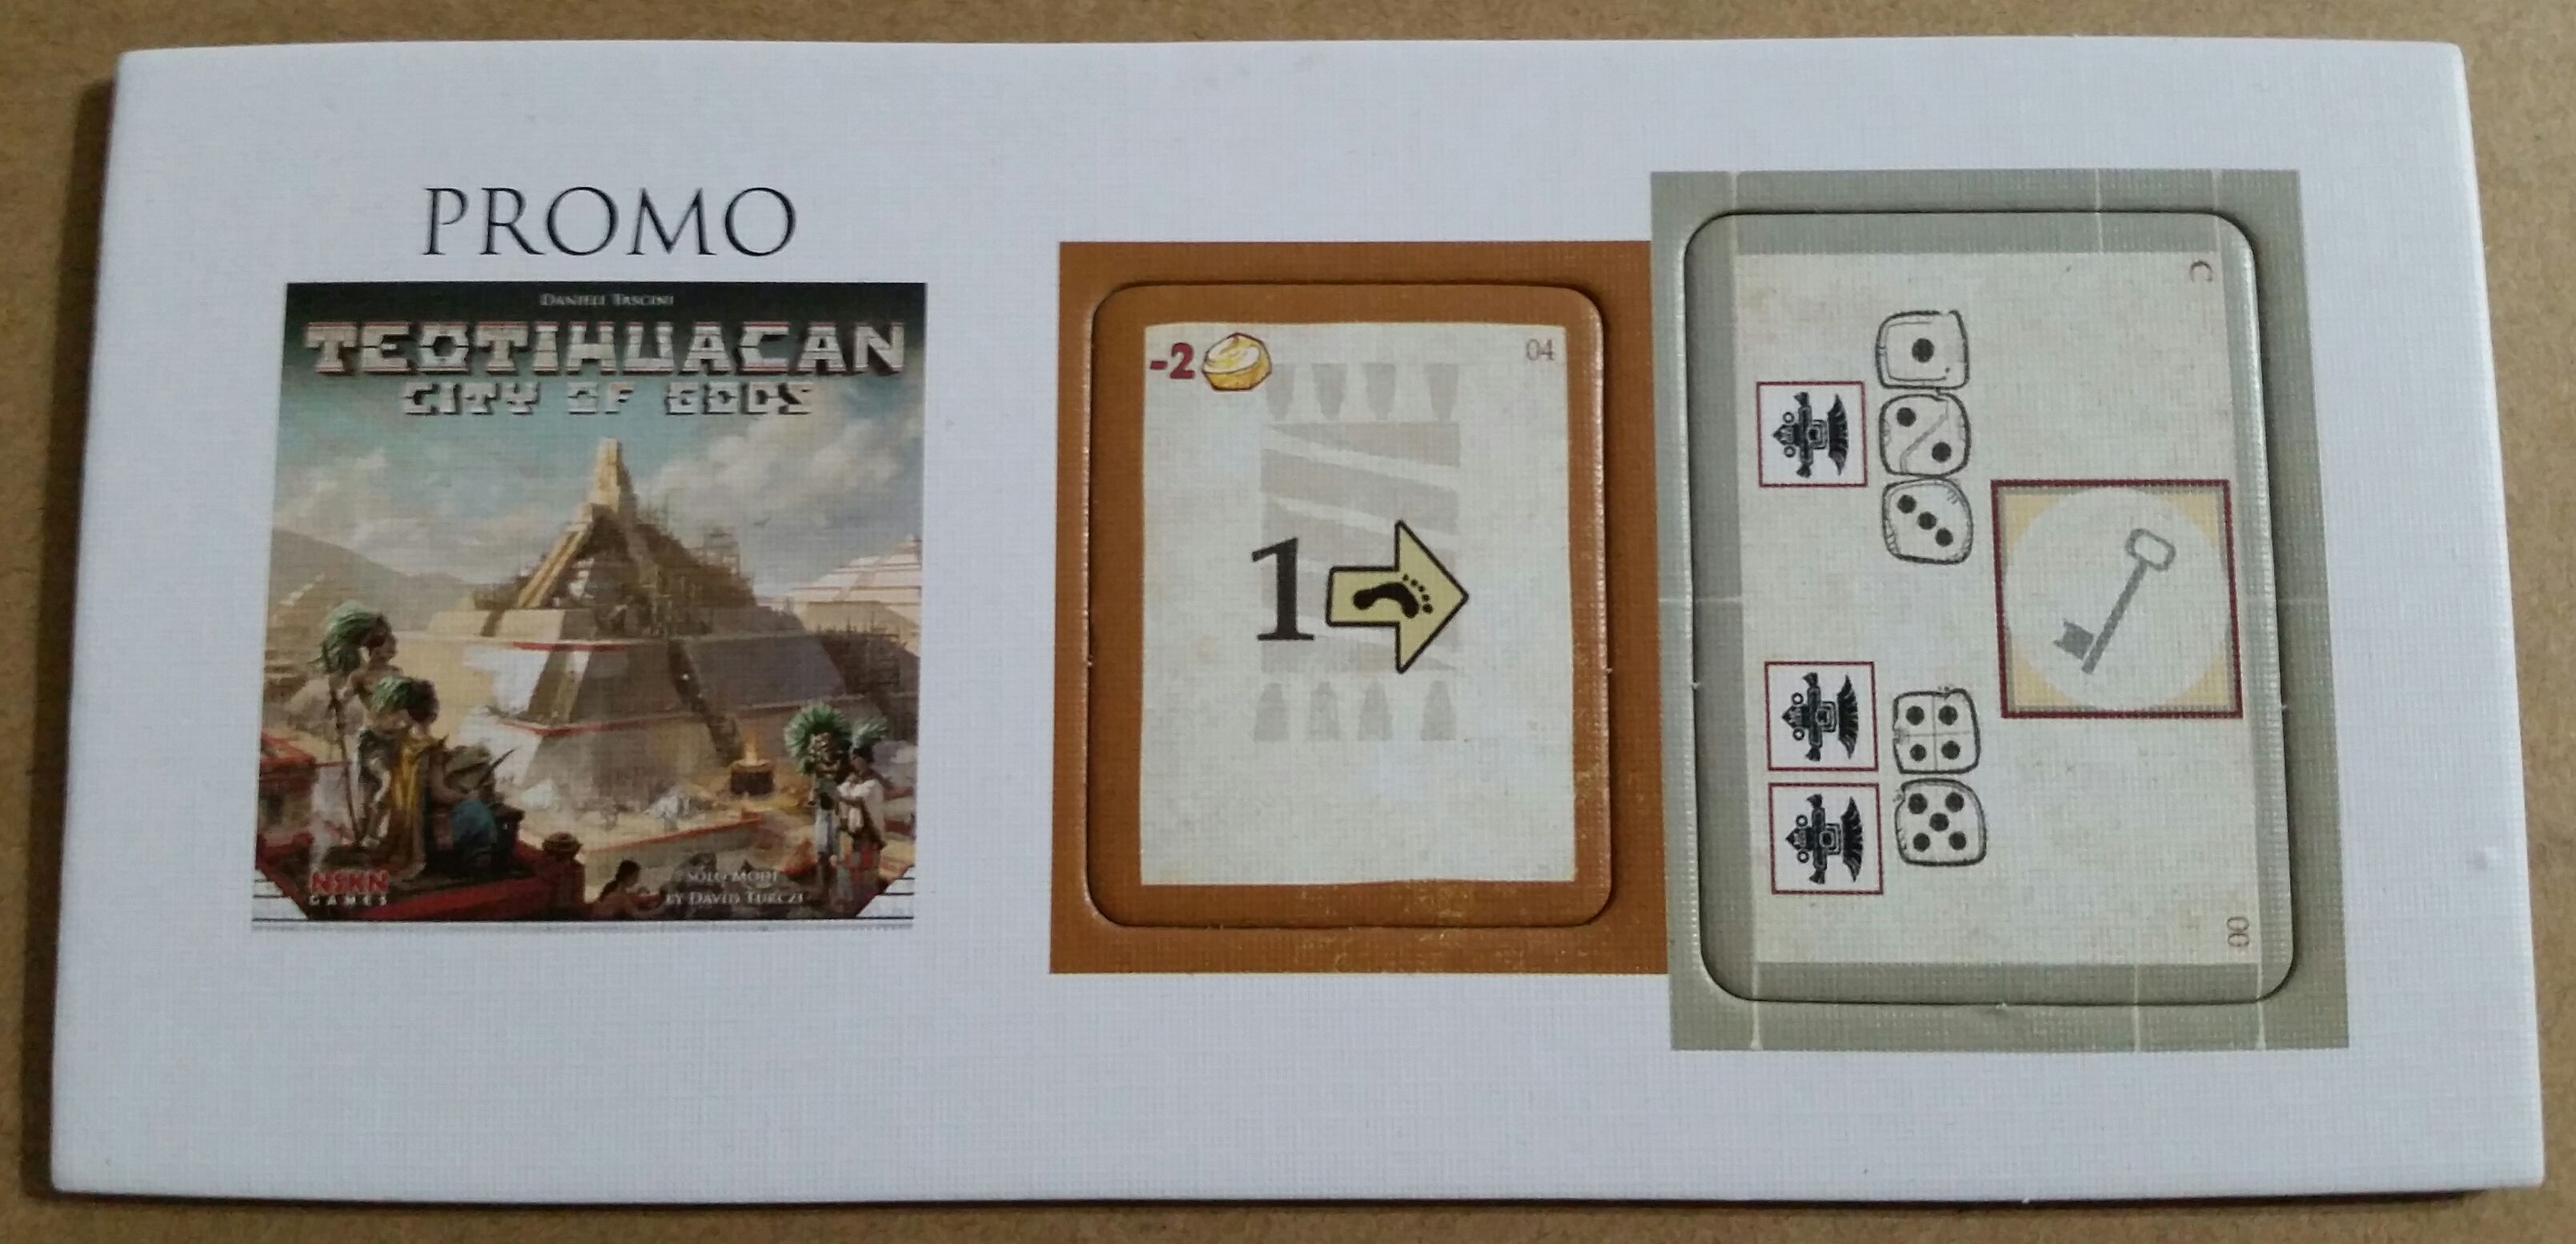 Teotihuacan: City of Gods – Dice Settlers Promo